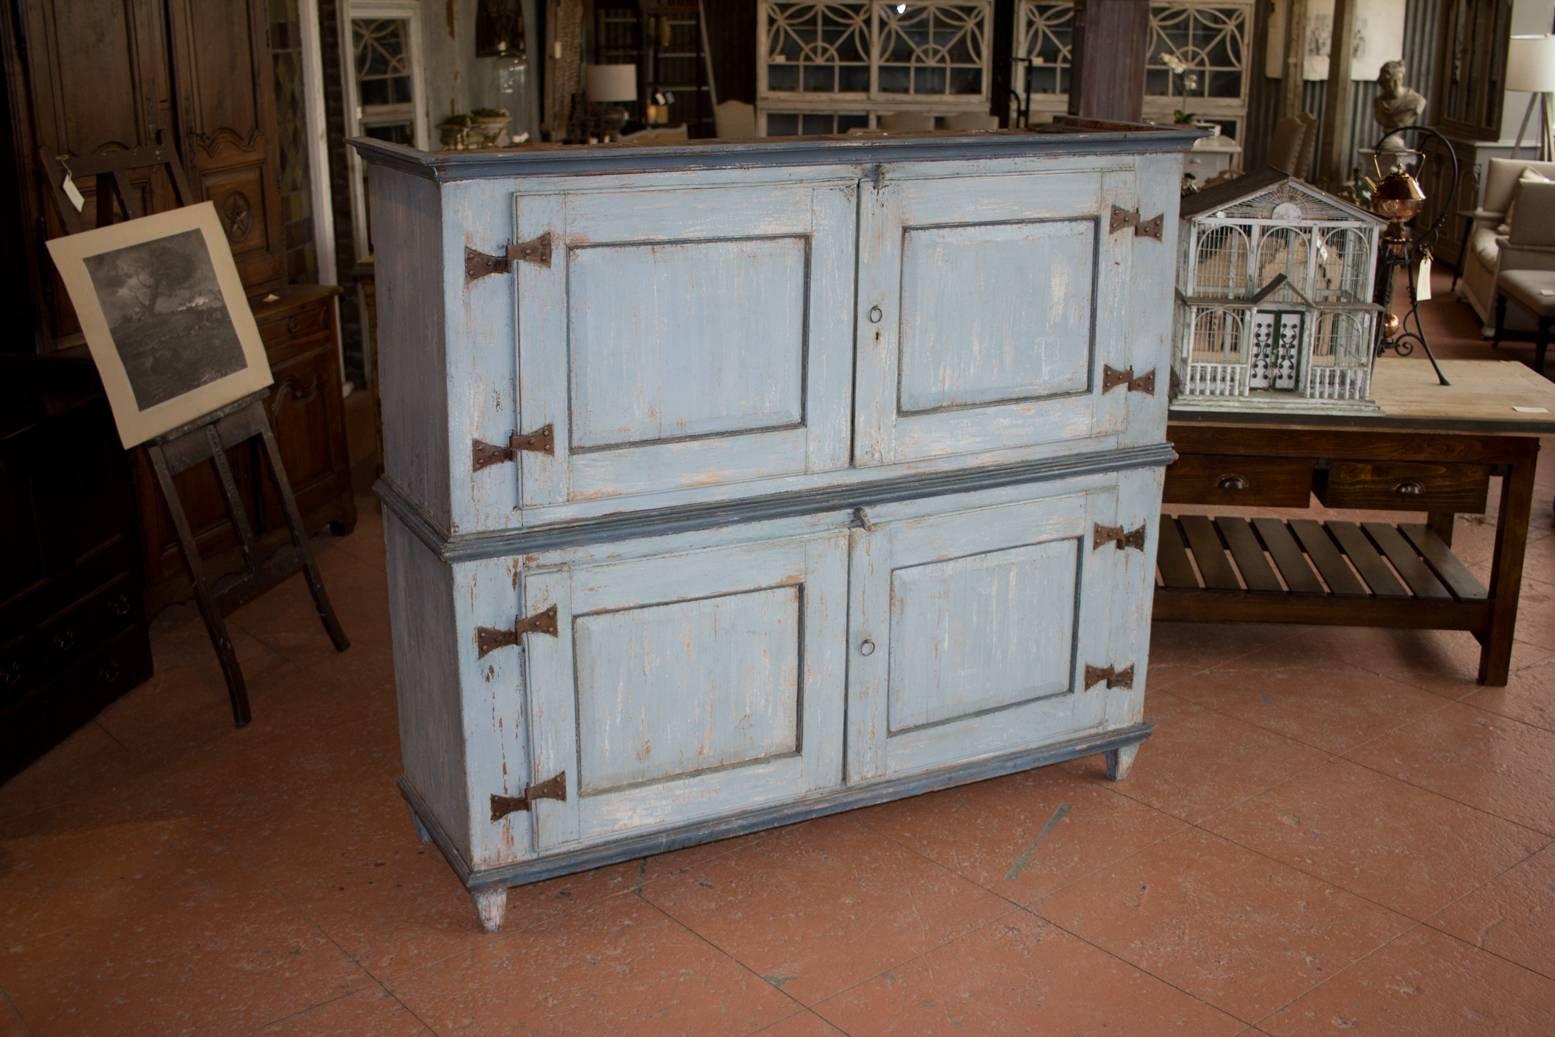 Rare circa early 1800s Gustavian four-door cupboard with butterfly hinges and its original blue paint. Inside has a beautiful rich terracotta paint color.